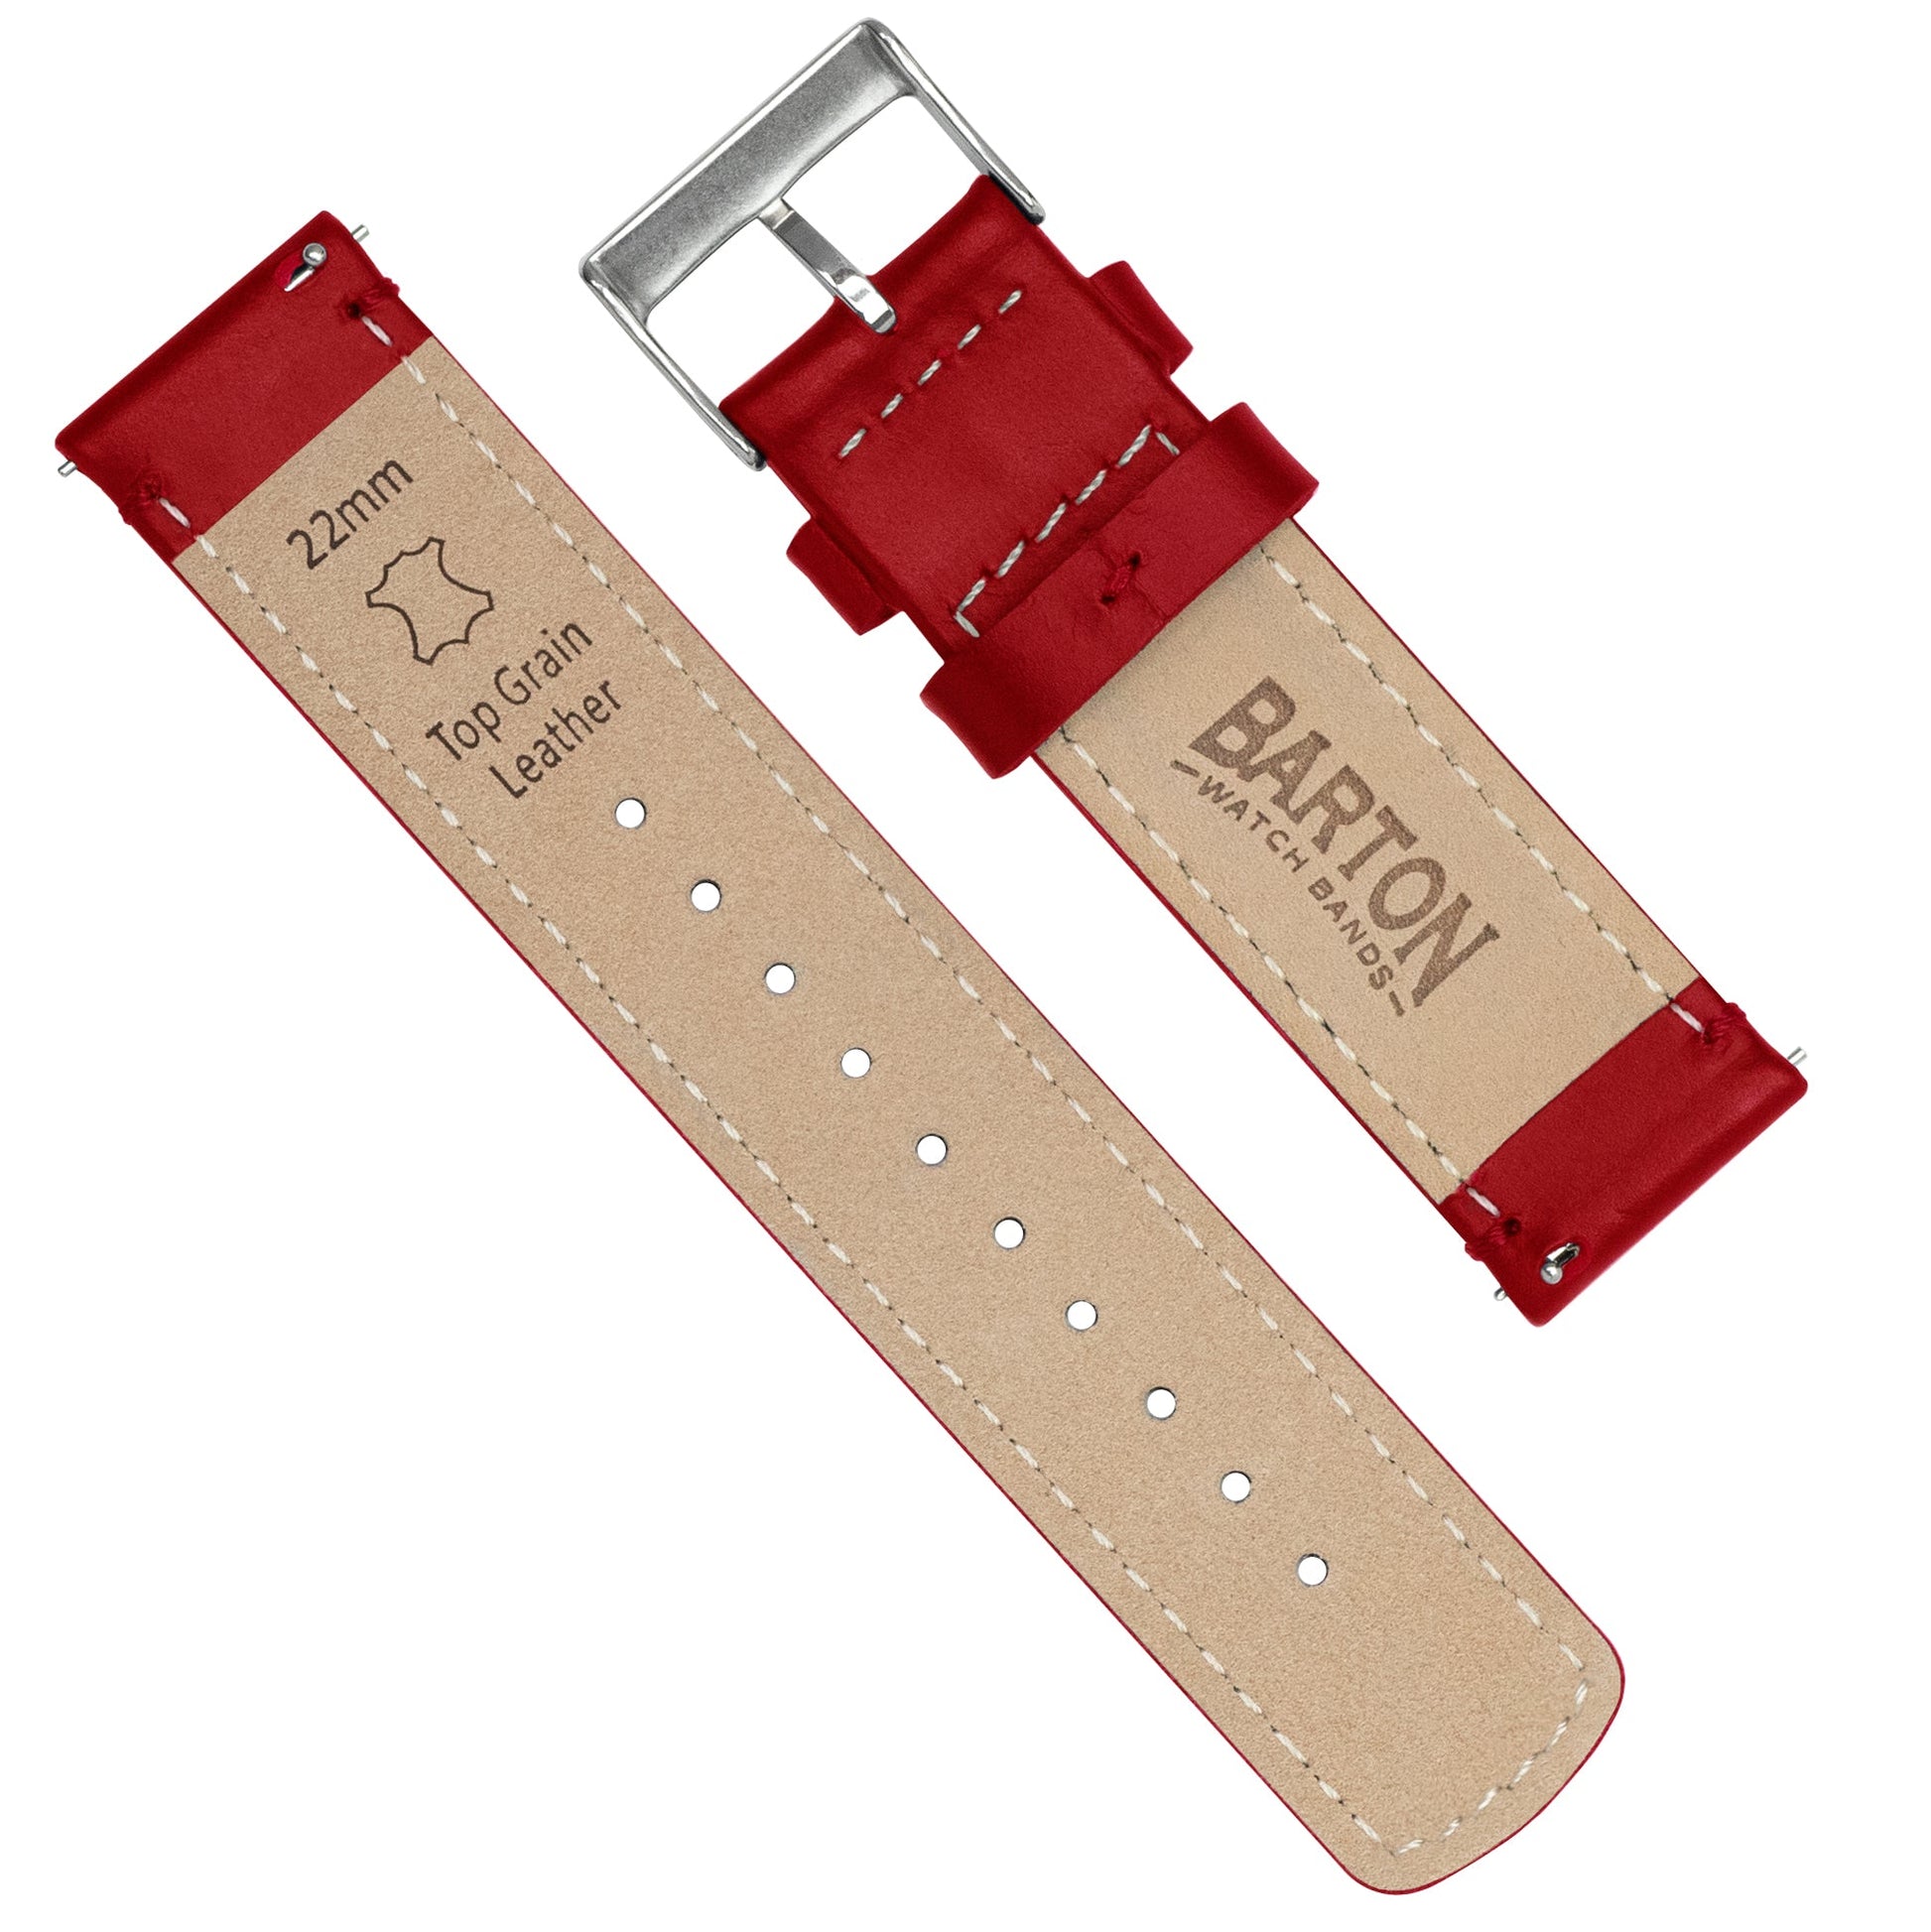 MOONSWATCH Bip | Red Leather &  Stitching - Barton Watch Bands